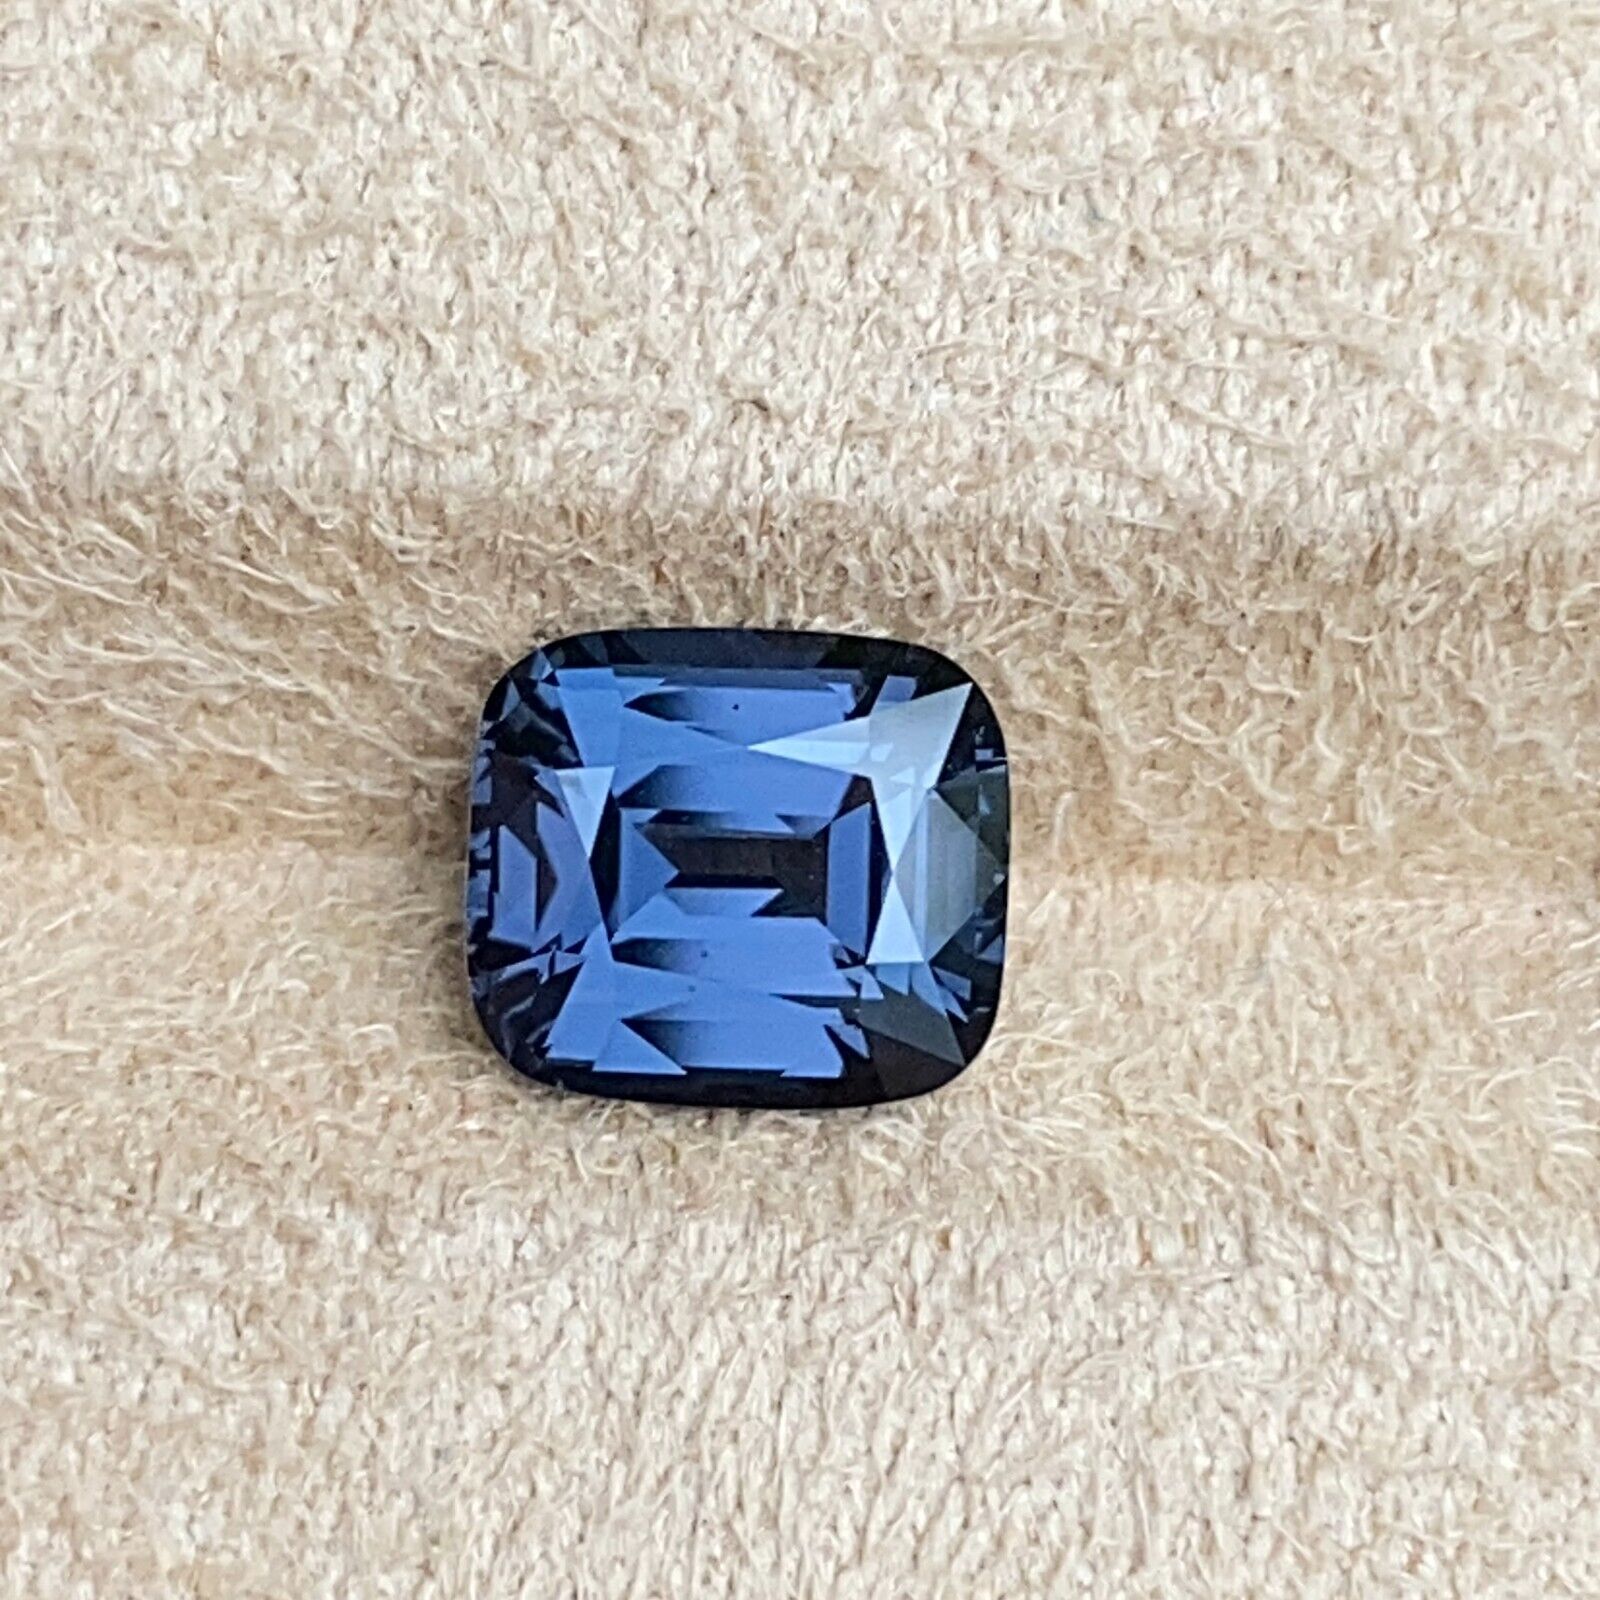 RAREST 2.60 CT\'s AWESOME METALLIC ASH BLUE SPINEL , UNHEATED GEM FROM SRI LANKA